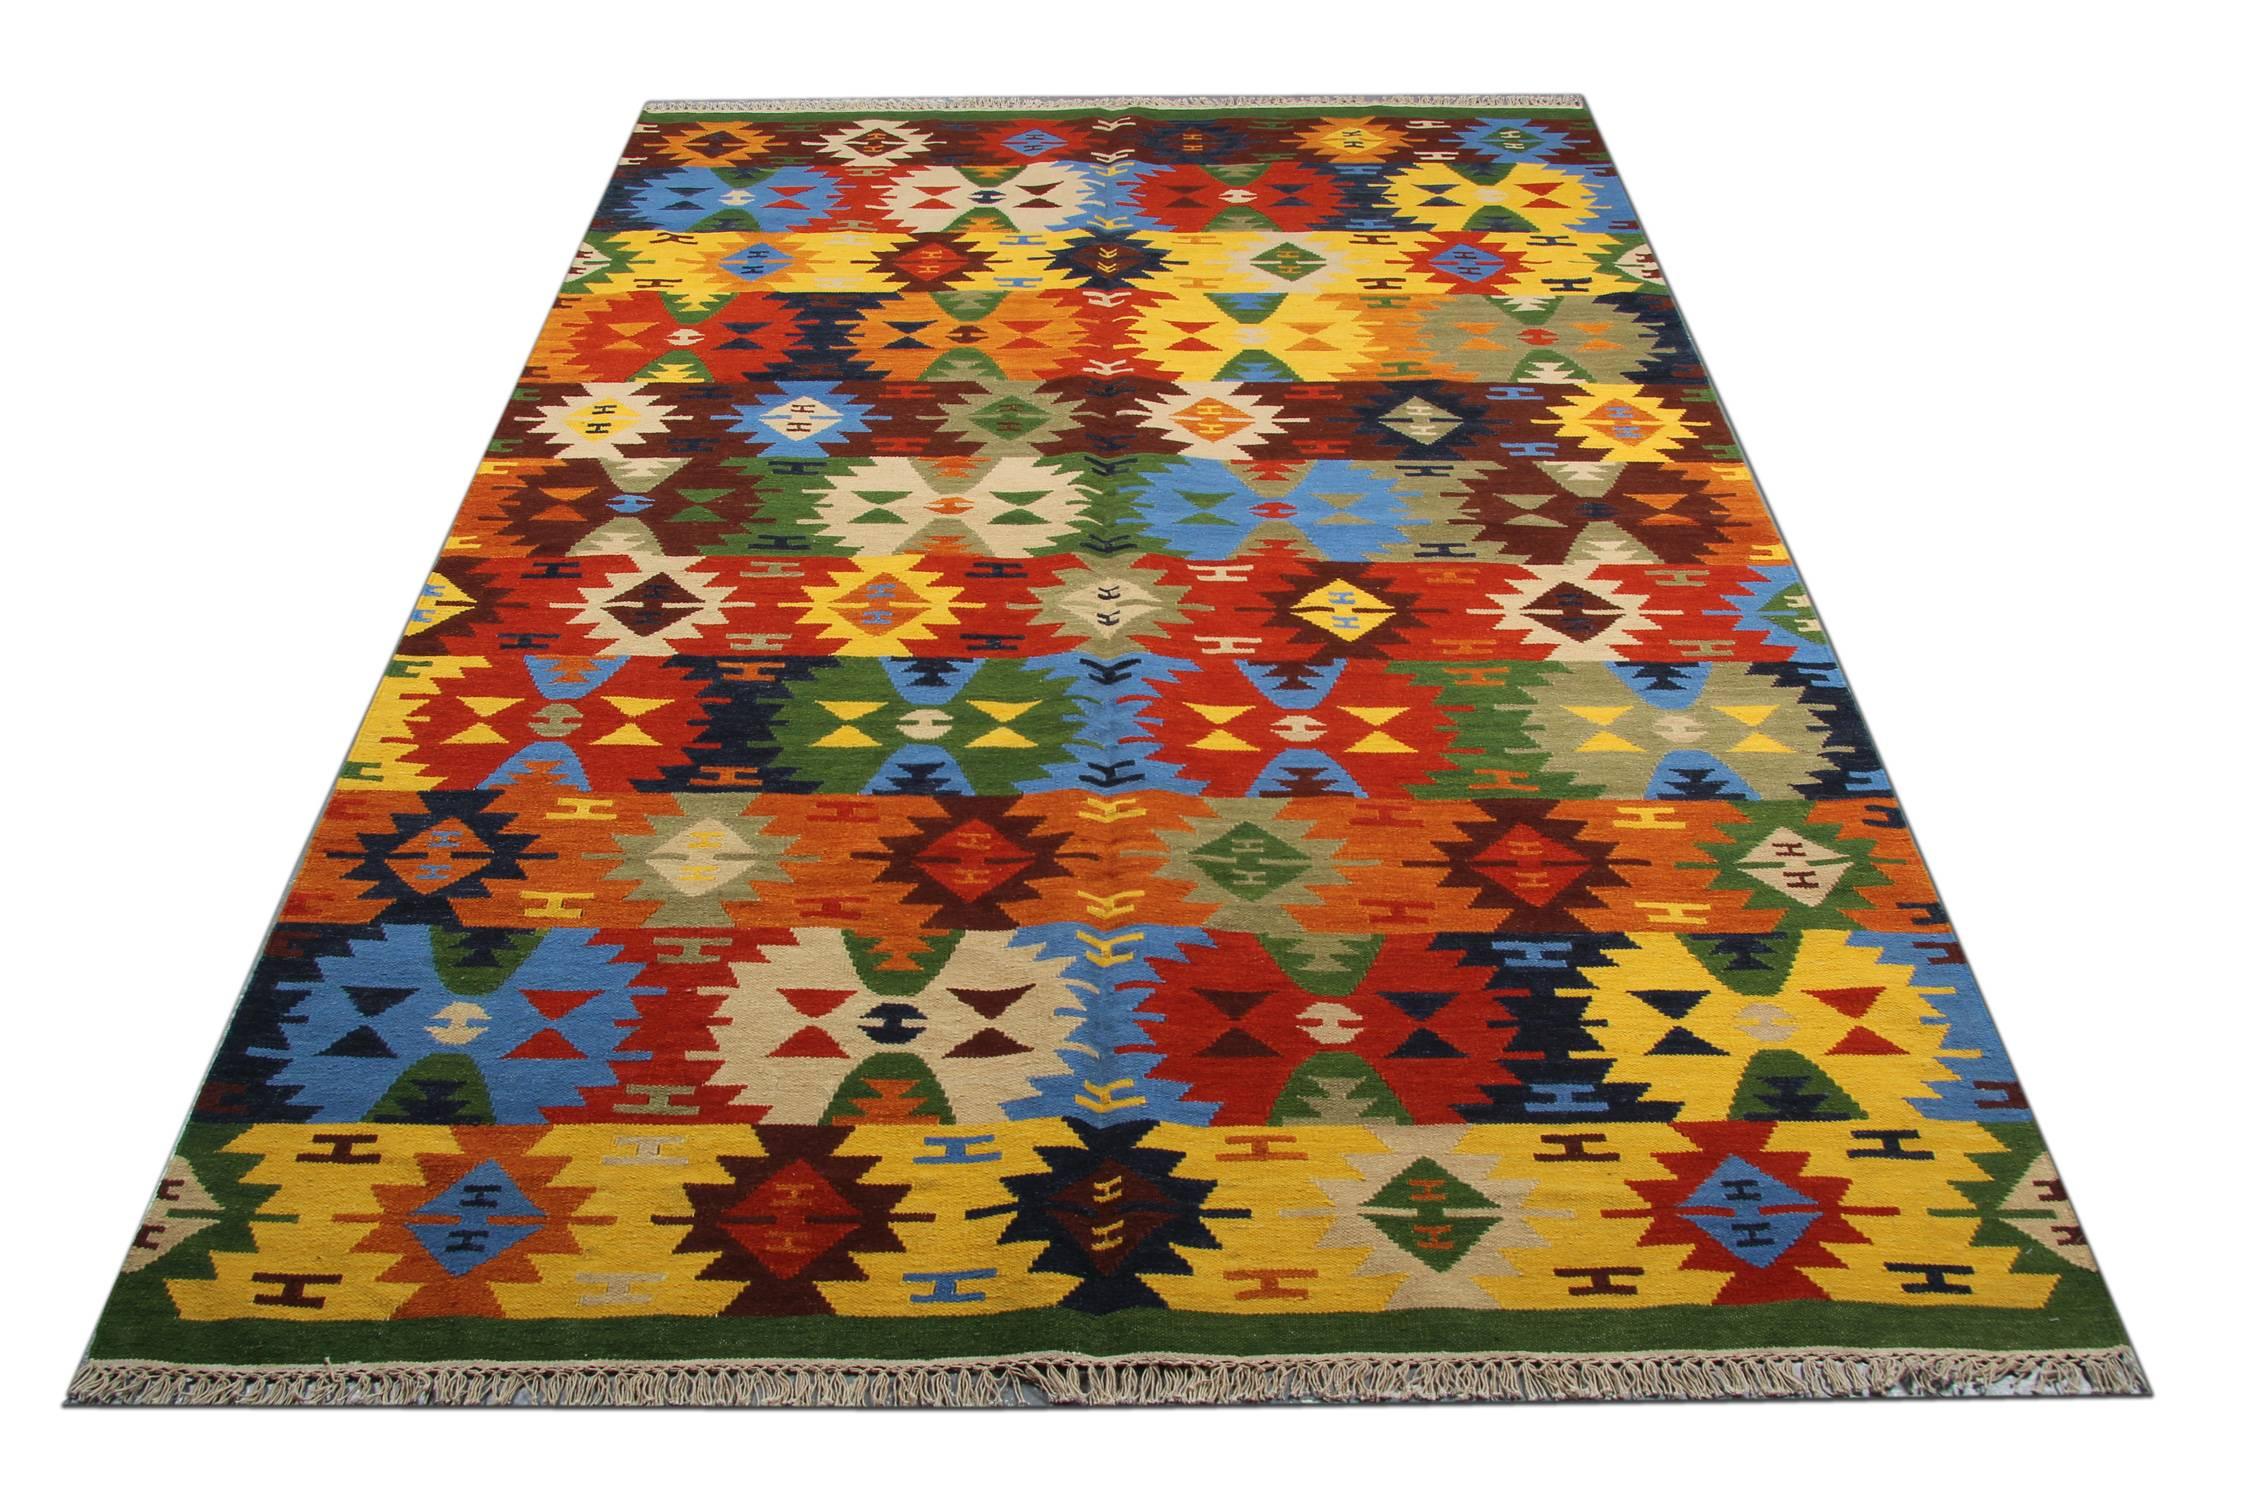 This beautiful wool area rug has been woven by hand and features a fantastic stripe geometric design. Woven in accents of brown, blue, green, yellow and rust. Symmetrically woven with sophistication this piece is sure to uplift any room it is